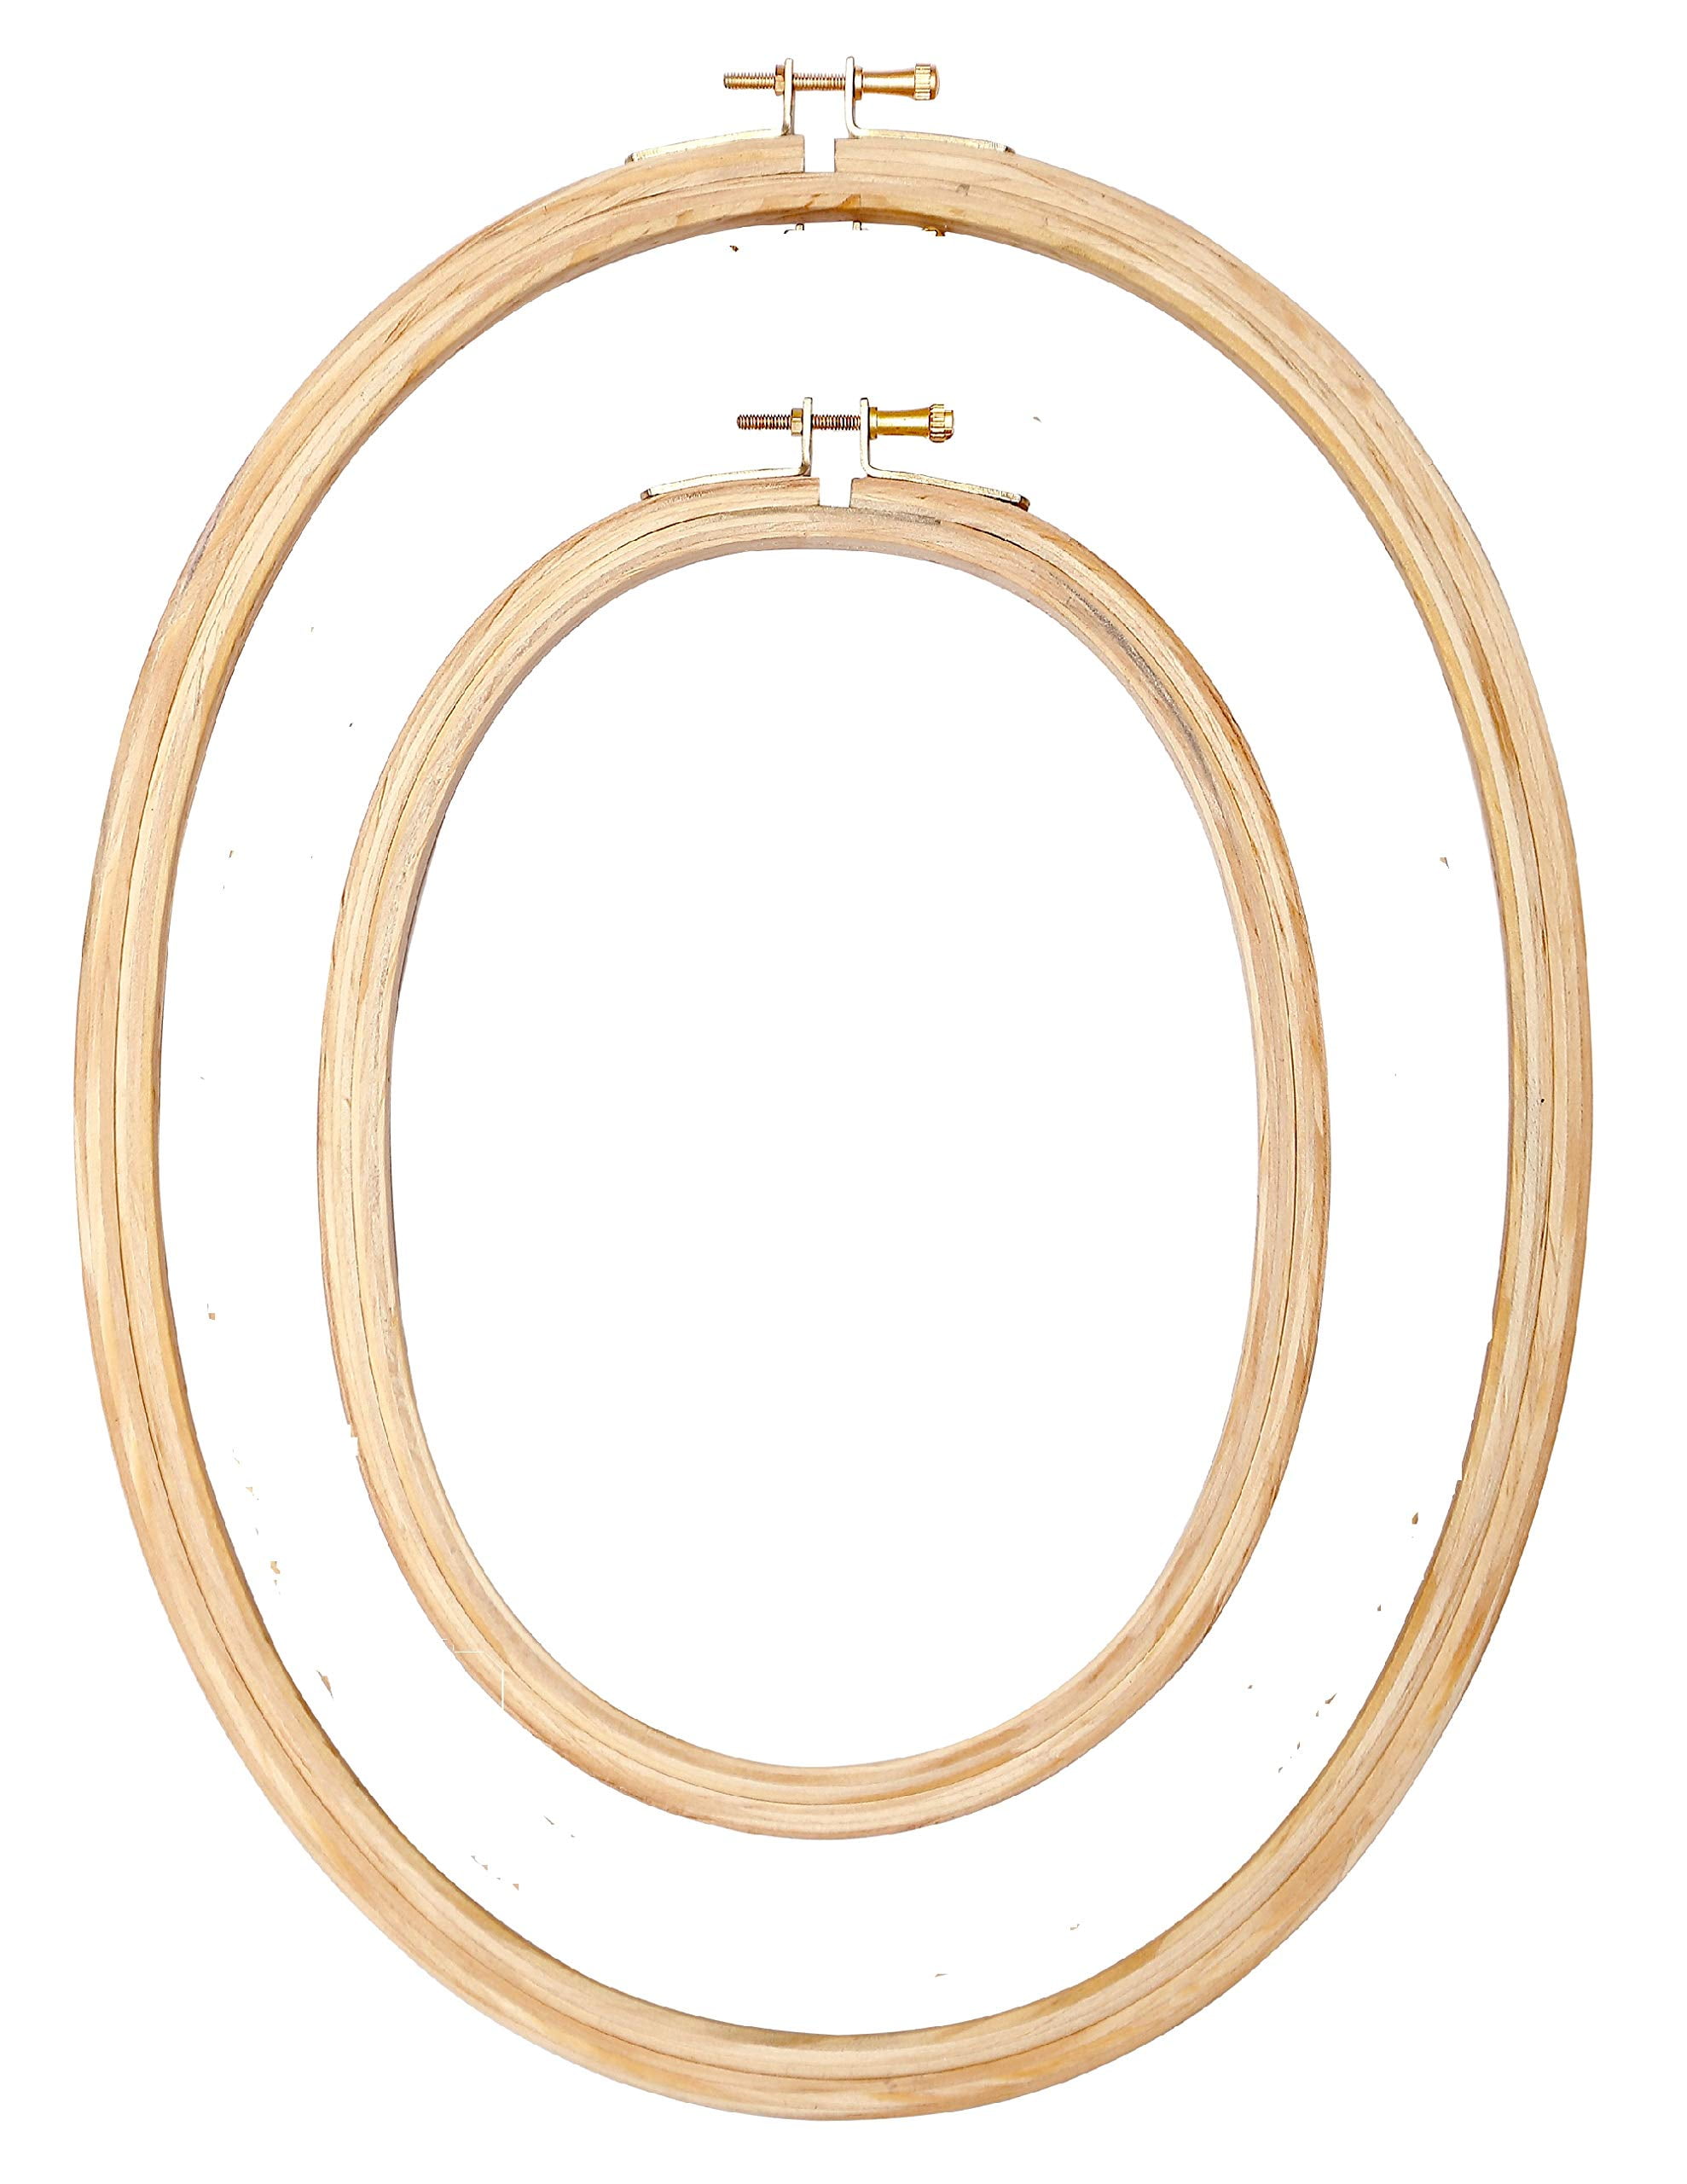 Wooden Hoop Ring Frame With Iron Tightener For Fabric Cross Stitching  Embroidery Art Sewing Painting Tool, Embroidery Rings, Embroidery Hoop,  Tambour Frame, एम्ब्रायडरी फ्रेम - Aumni Source Retail Solutions Private  Limited, Coimbatore |